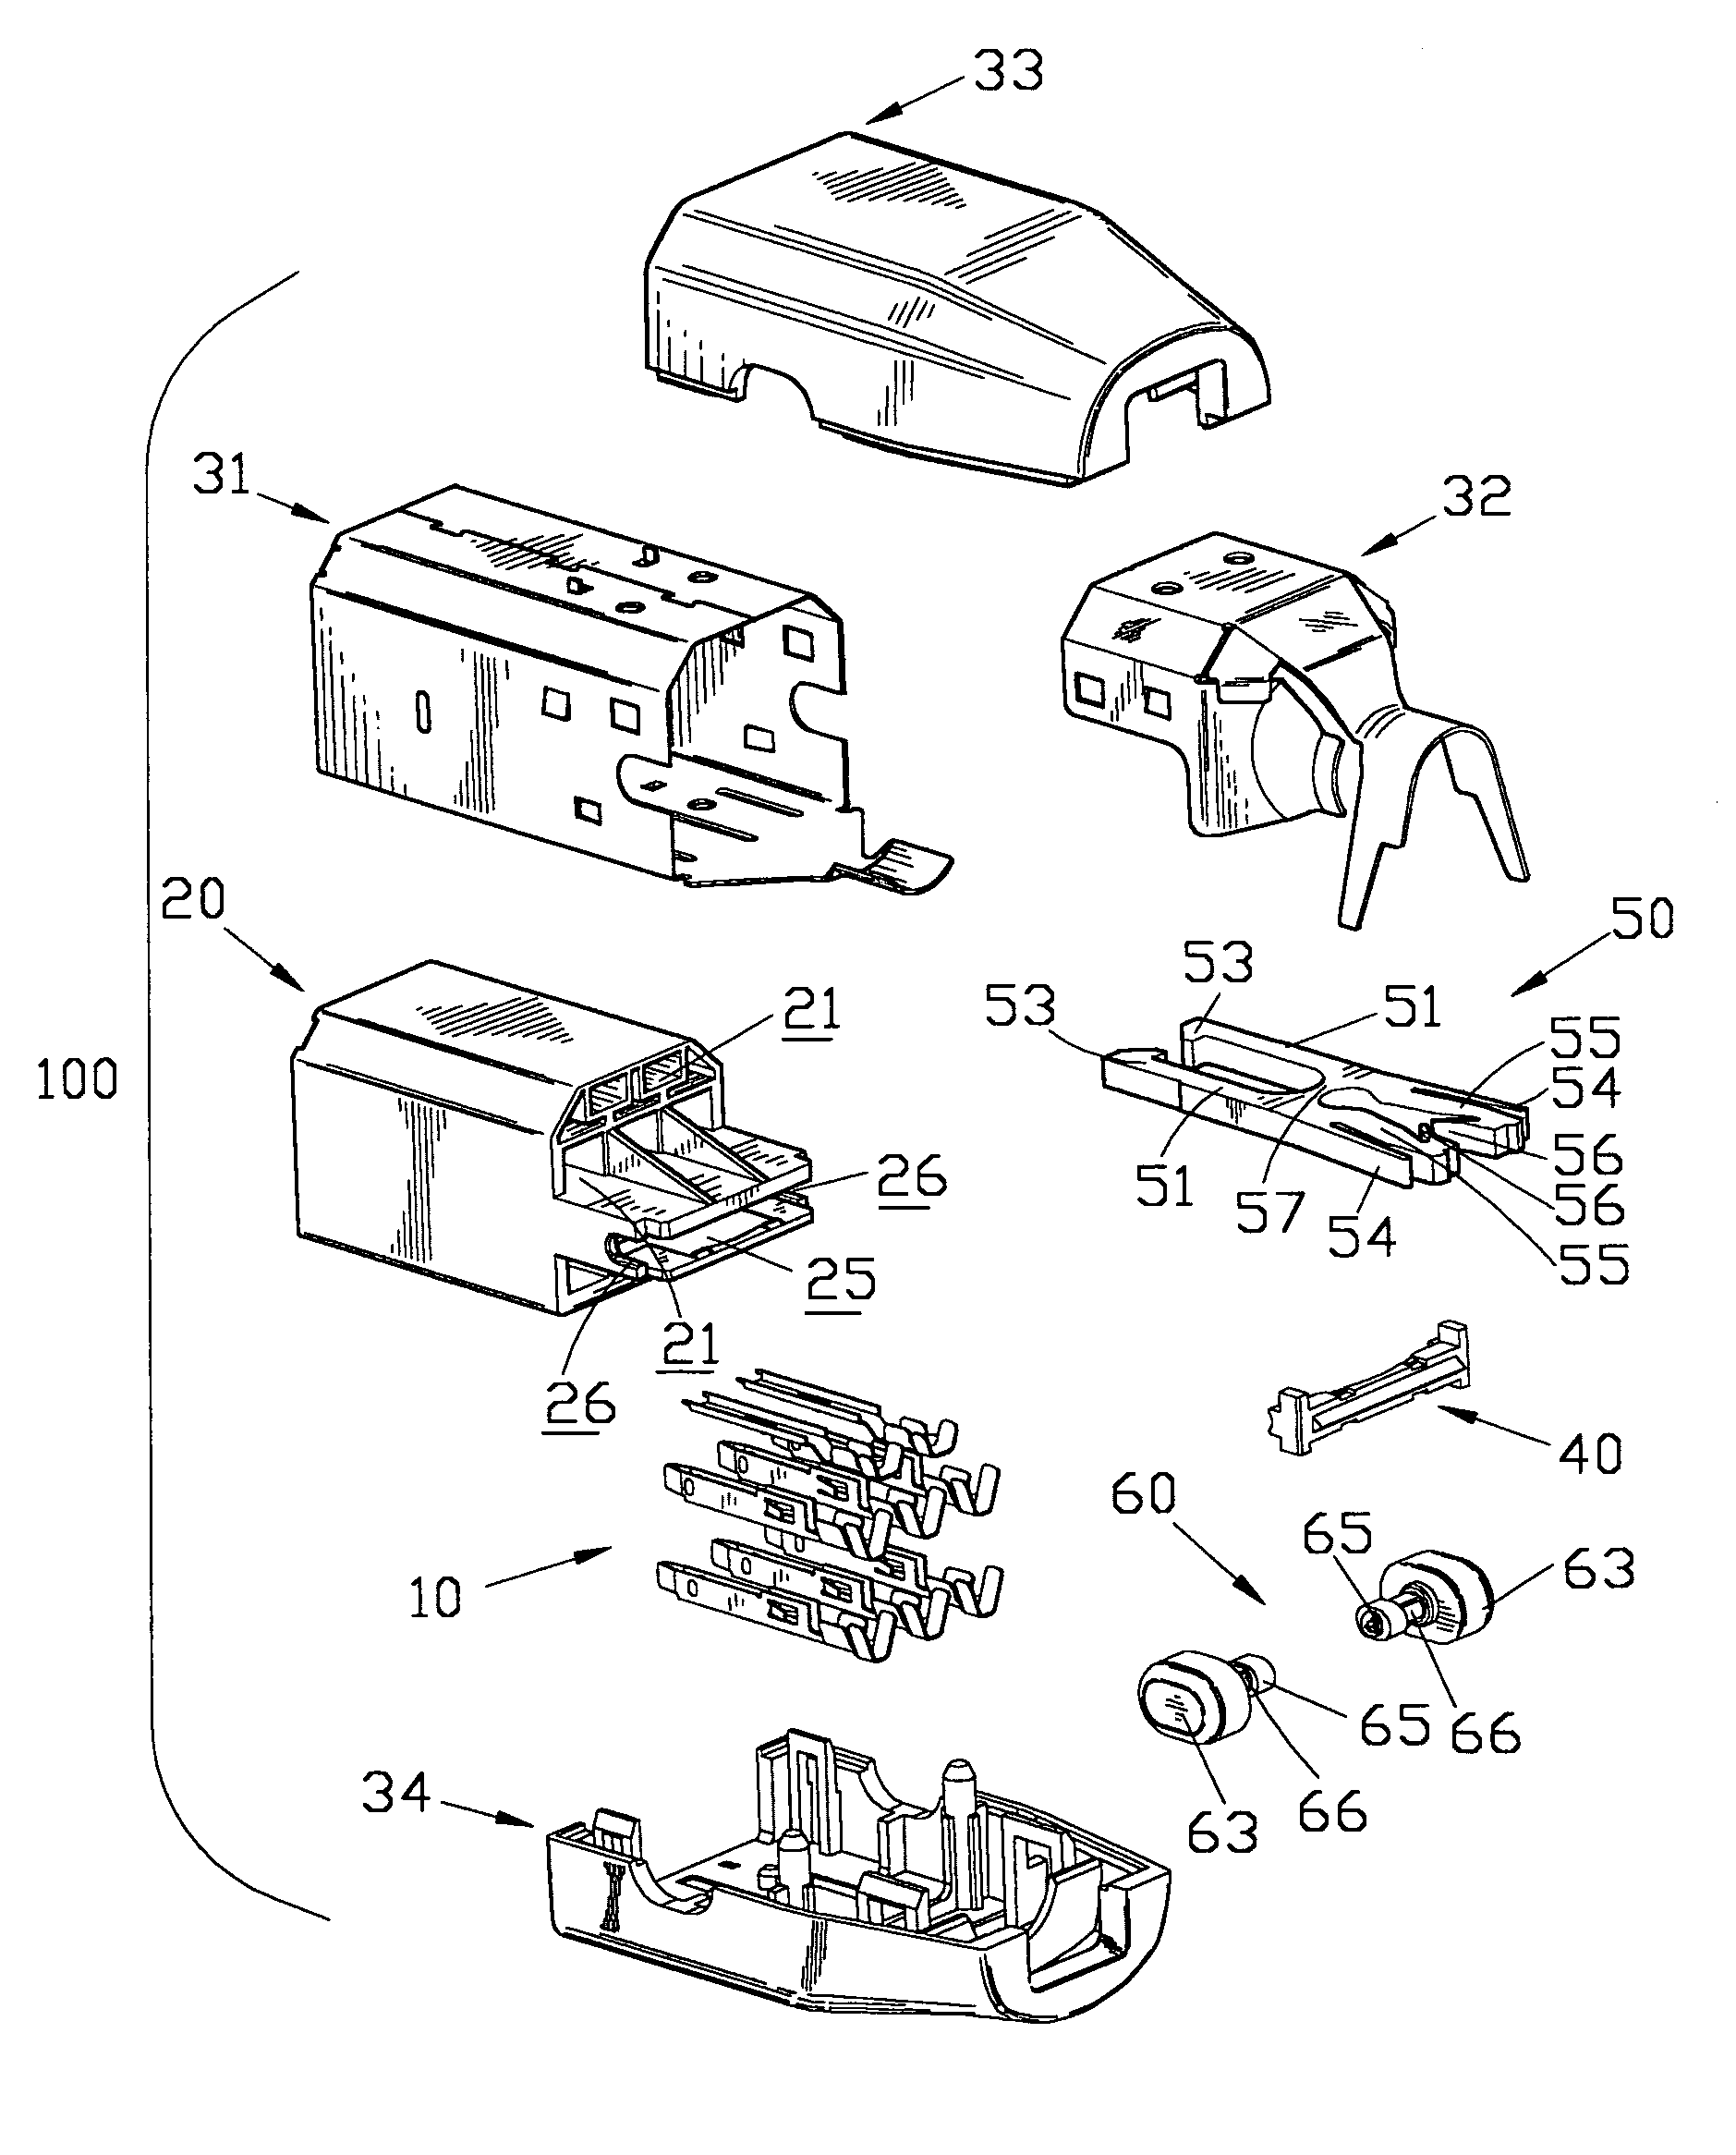 Electrical connector with latch mechanism